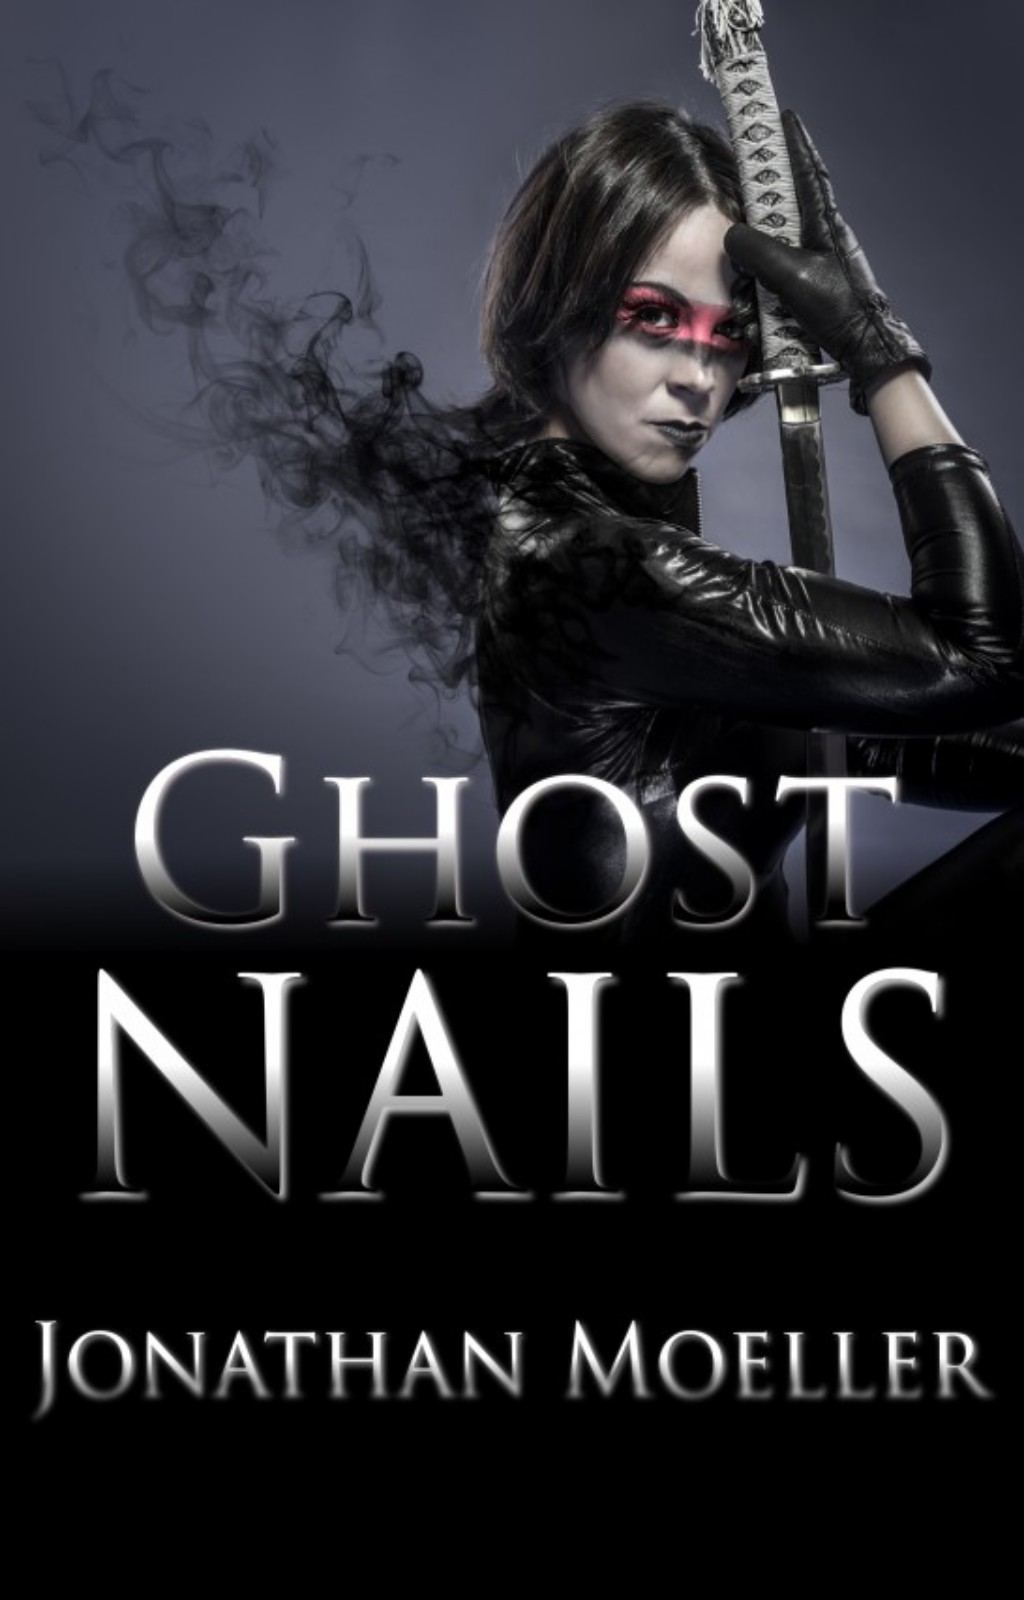 Ghost Nails by Jonathan Moeller